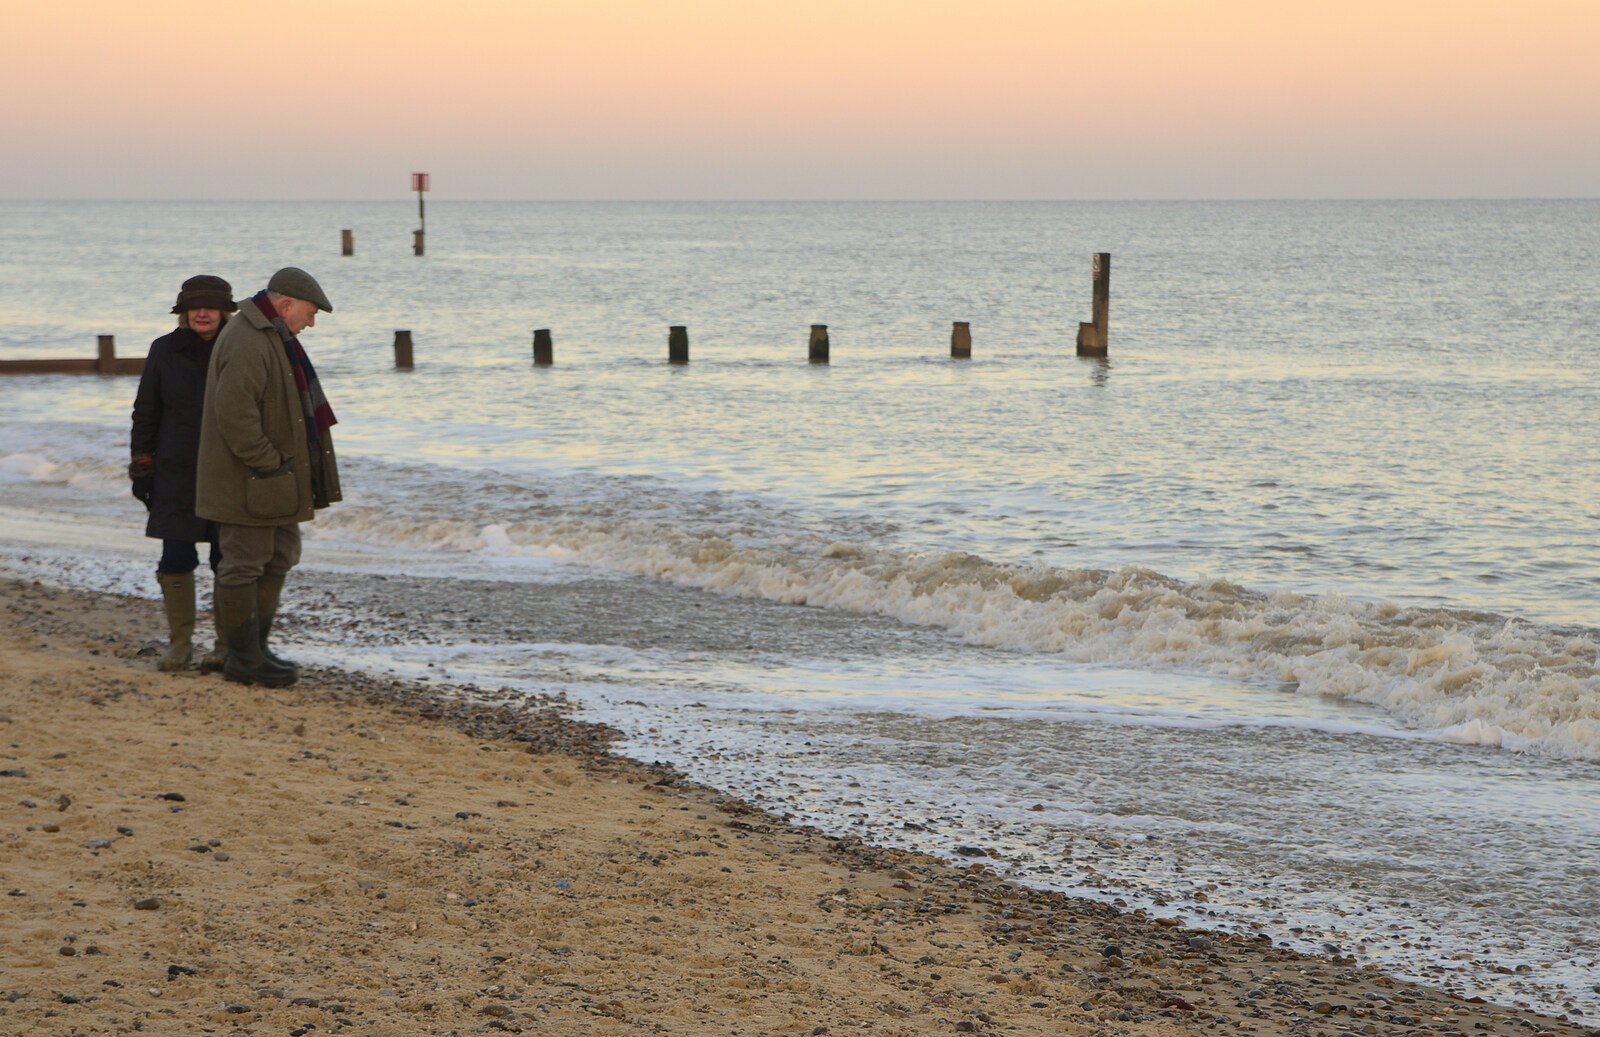 An old couple on the beach from Sunset on the Beach, Southwold, Suffolk - 30th December 2014